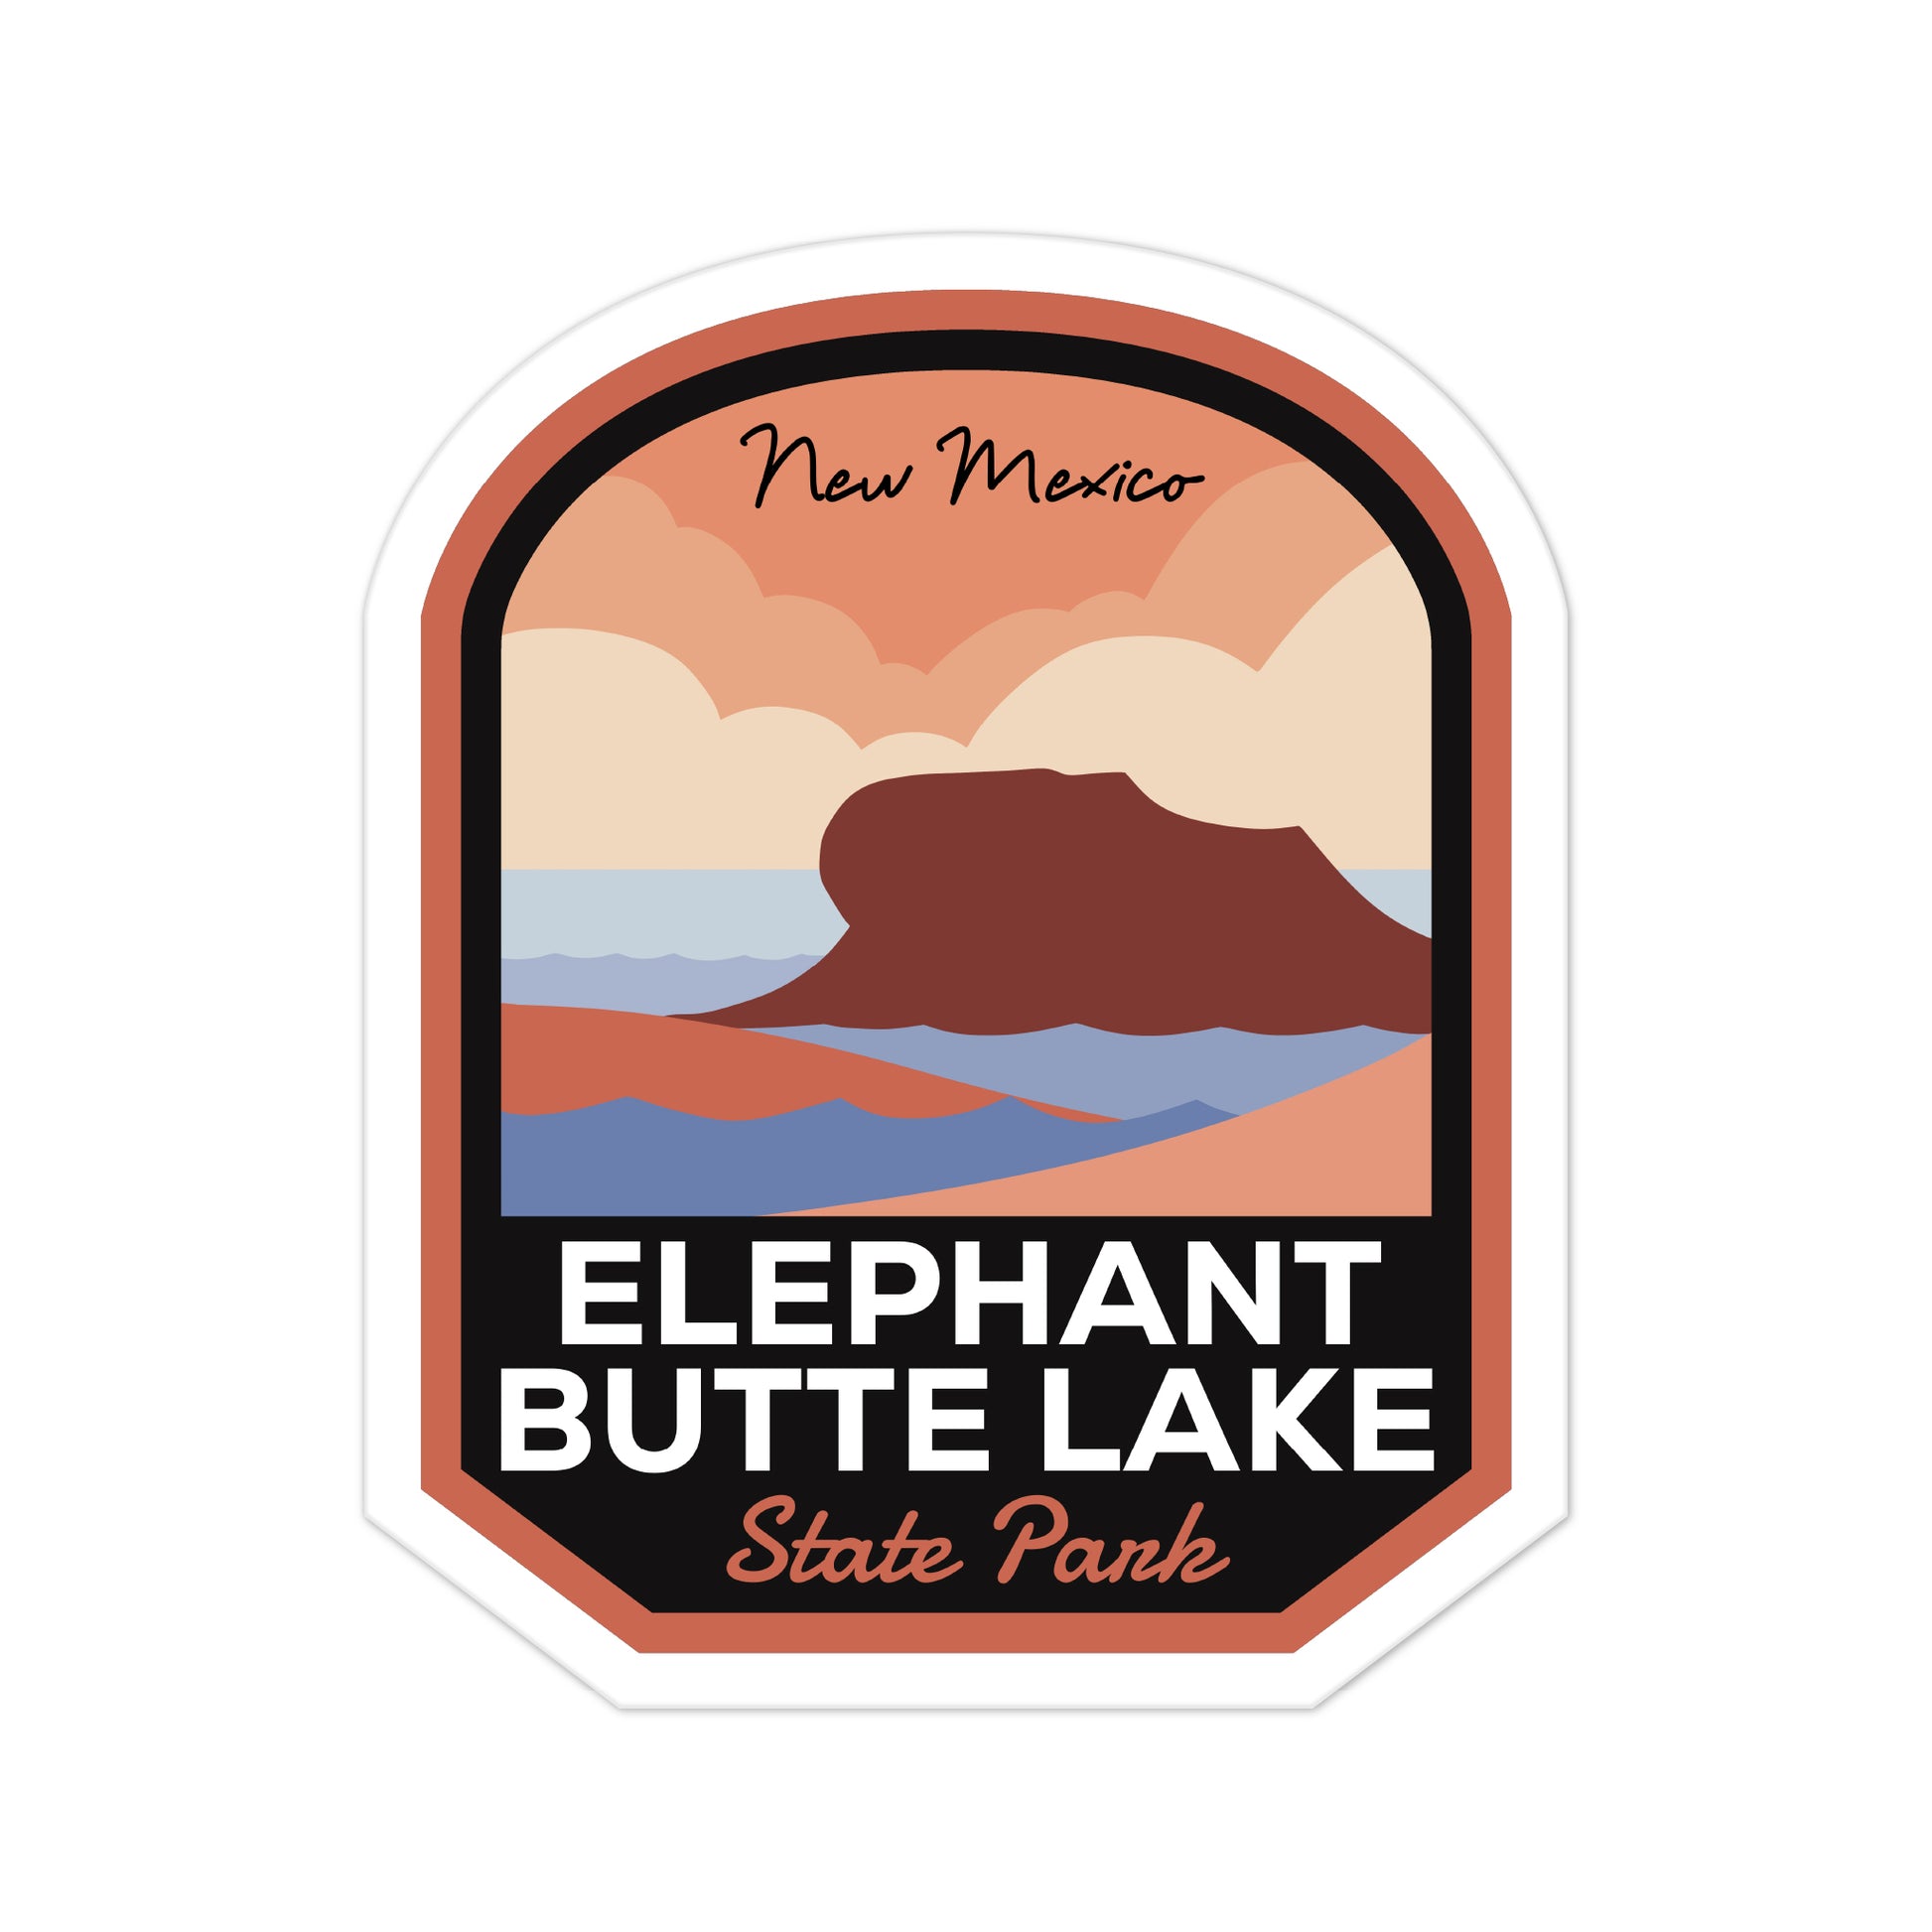 A sticker of Elephant Butte Lake State Park